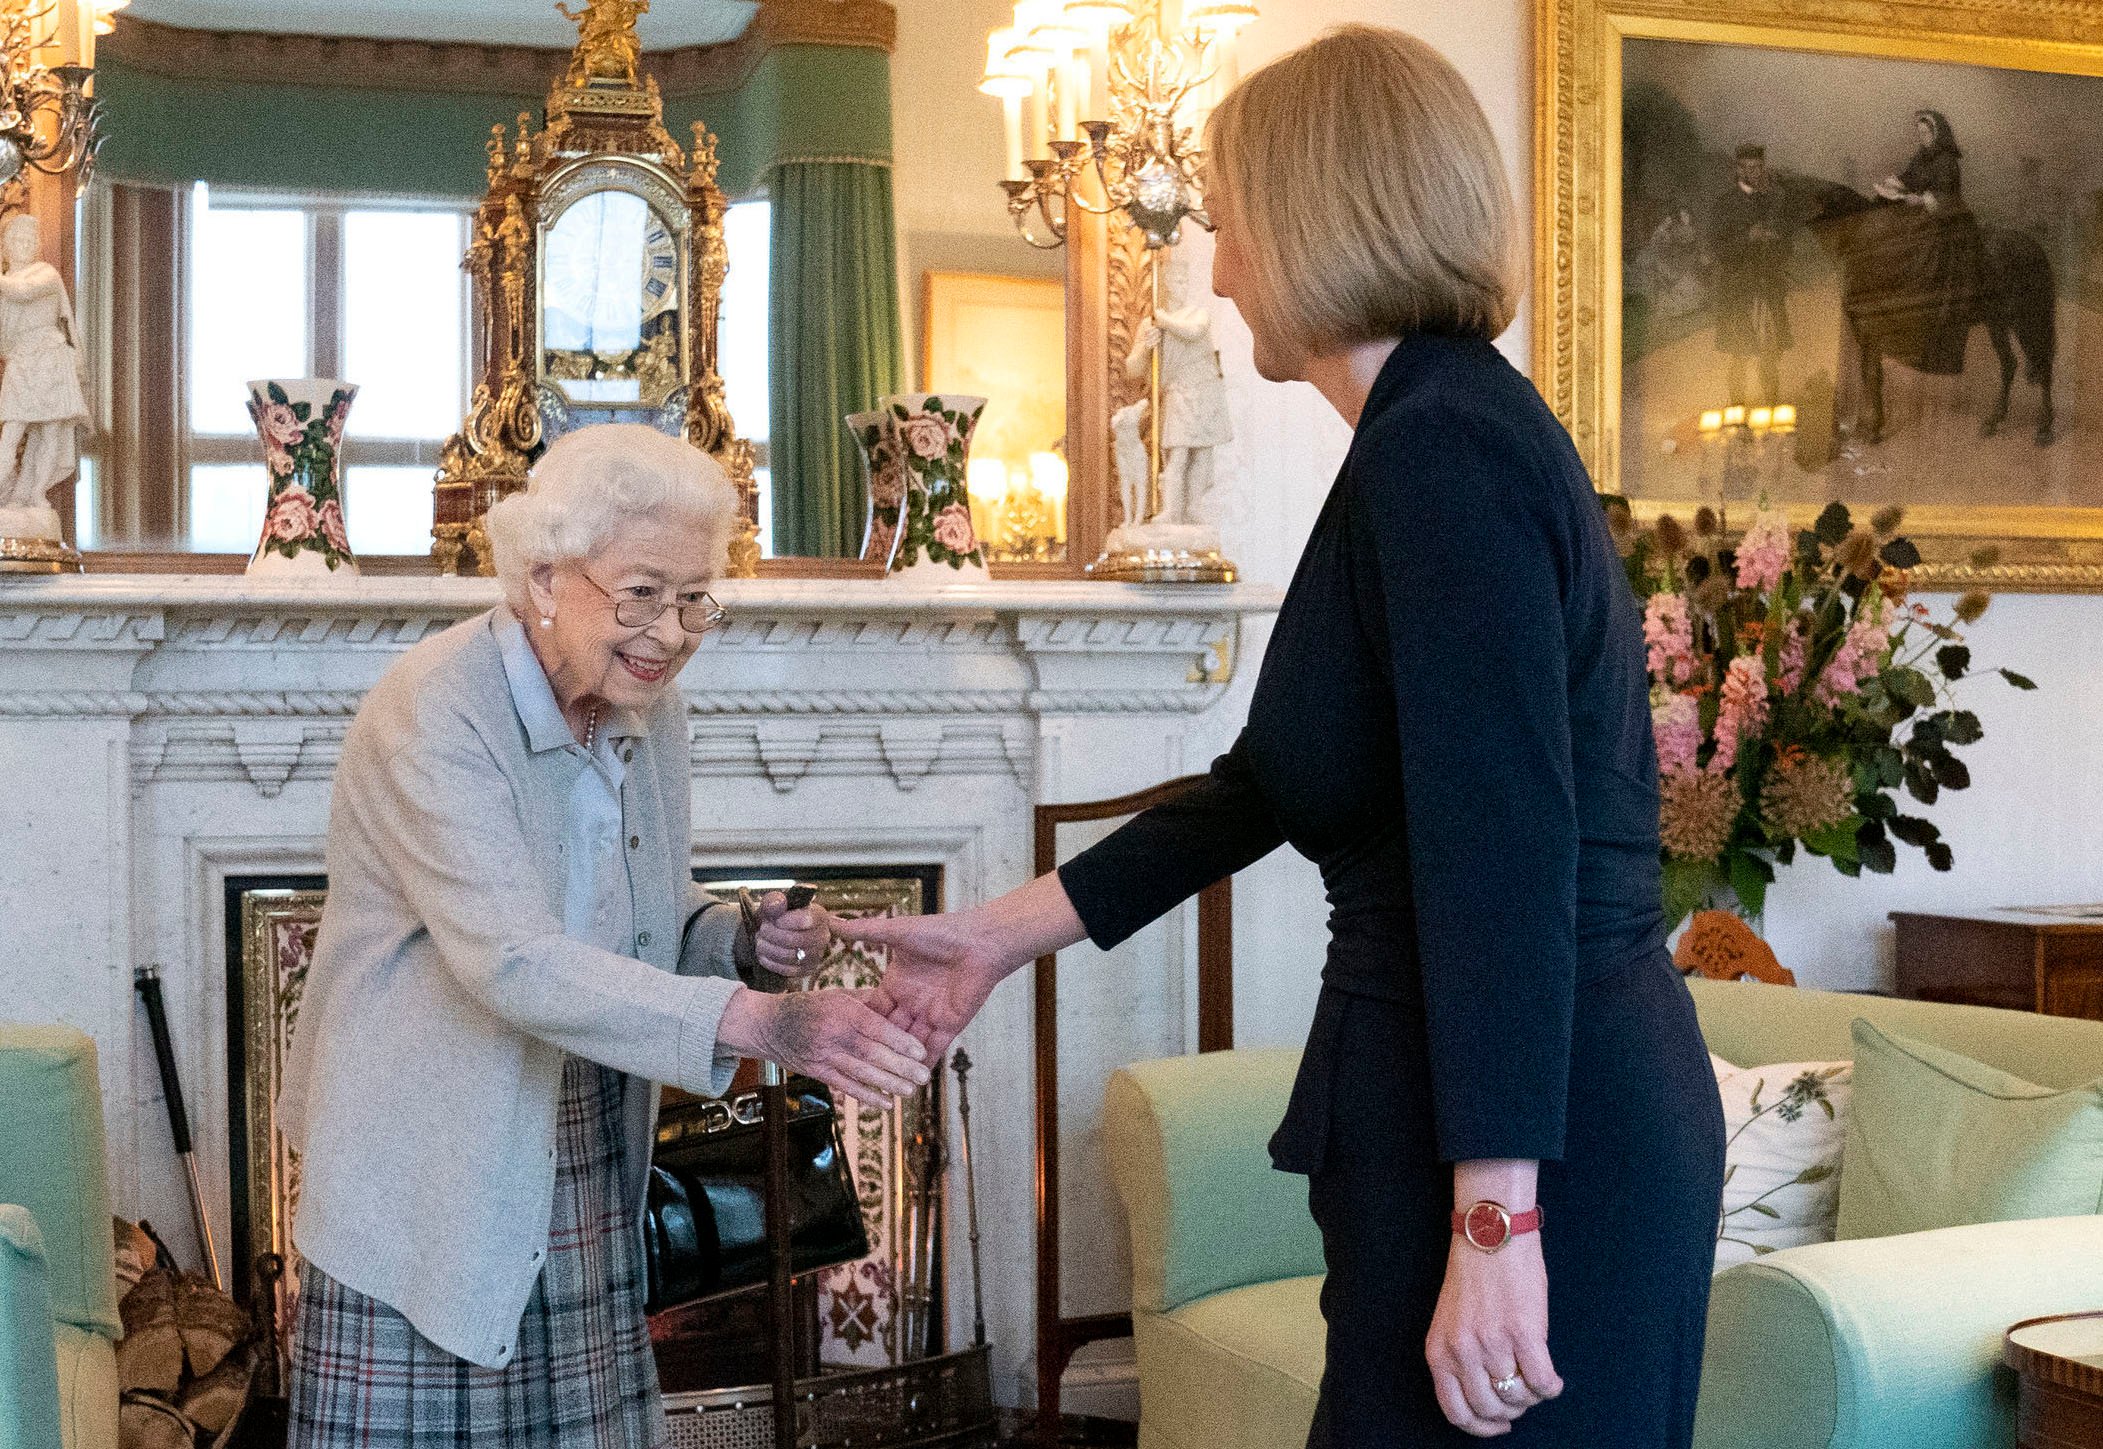 One of the last images taken of Queen Elizabeth II as she greets newly elected PM Liz Truss at Balmoral Castle